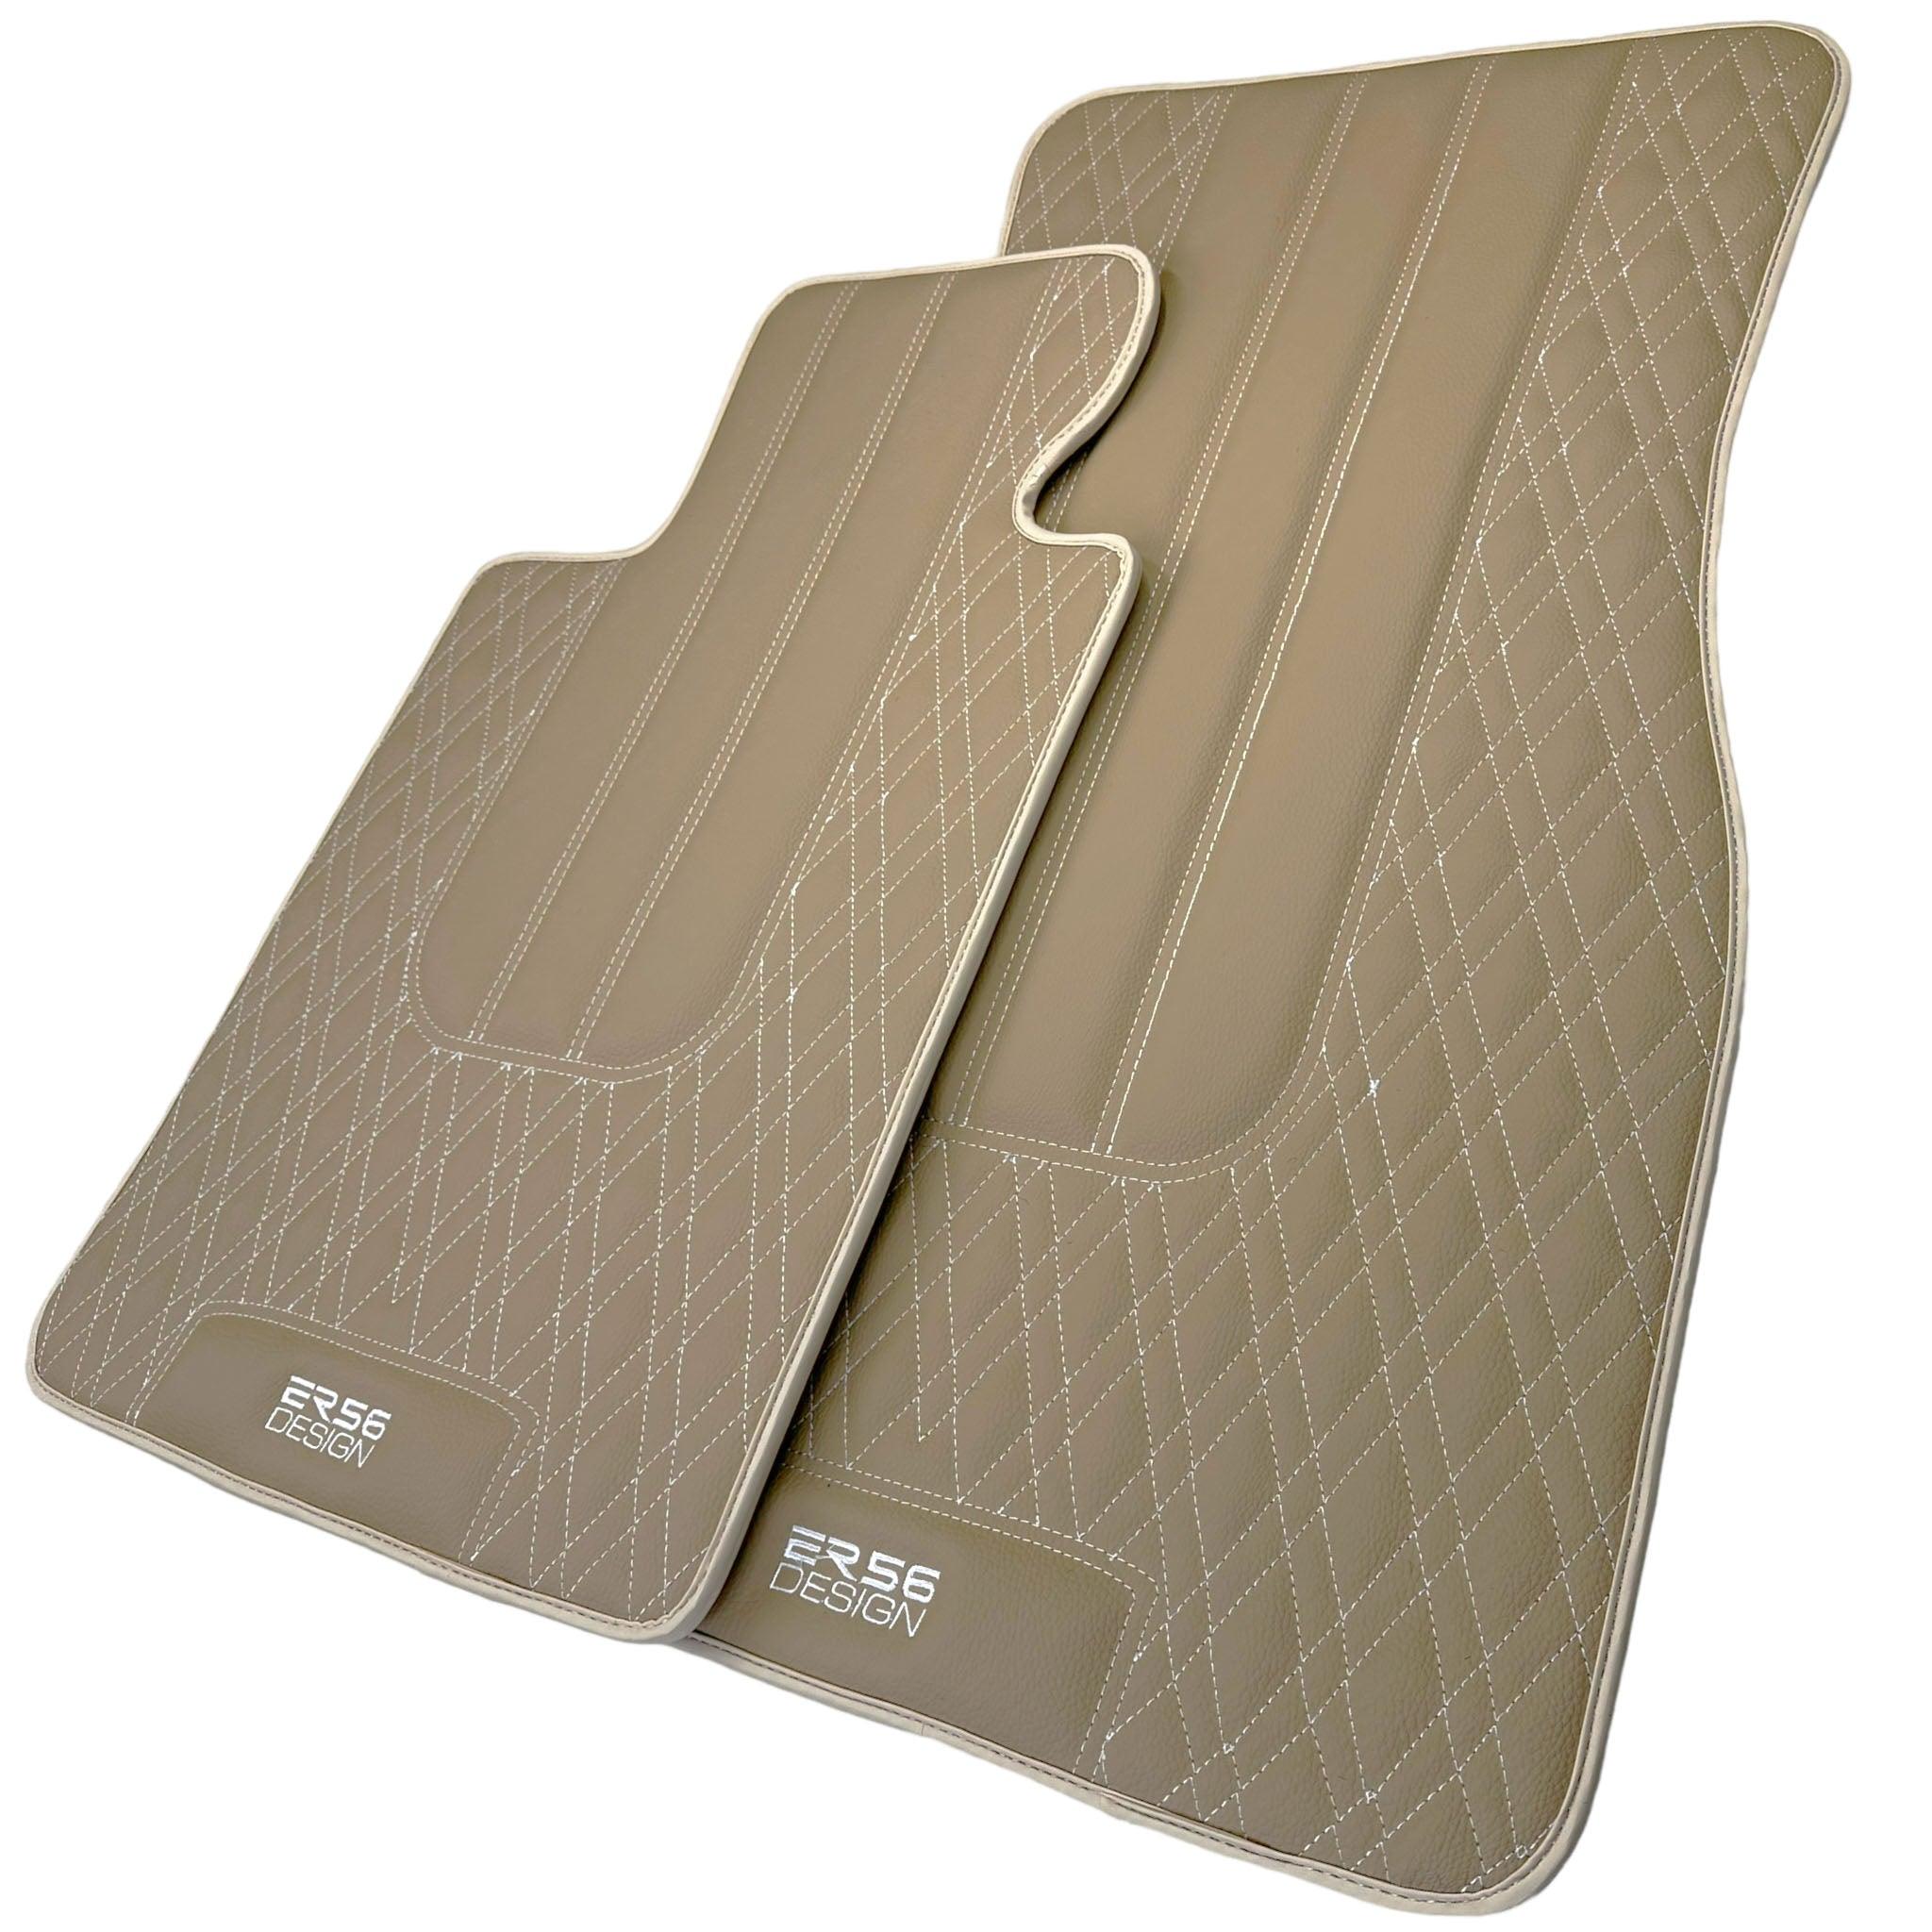 Beige Leather Floor Mats For BMW X5M F85 SUV